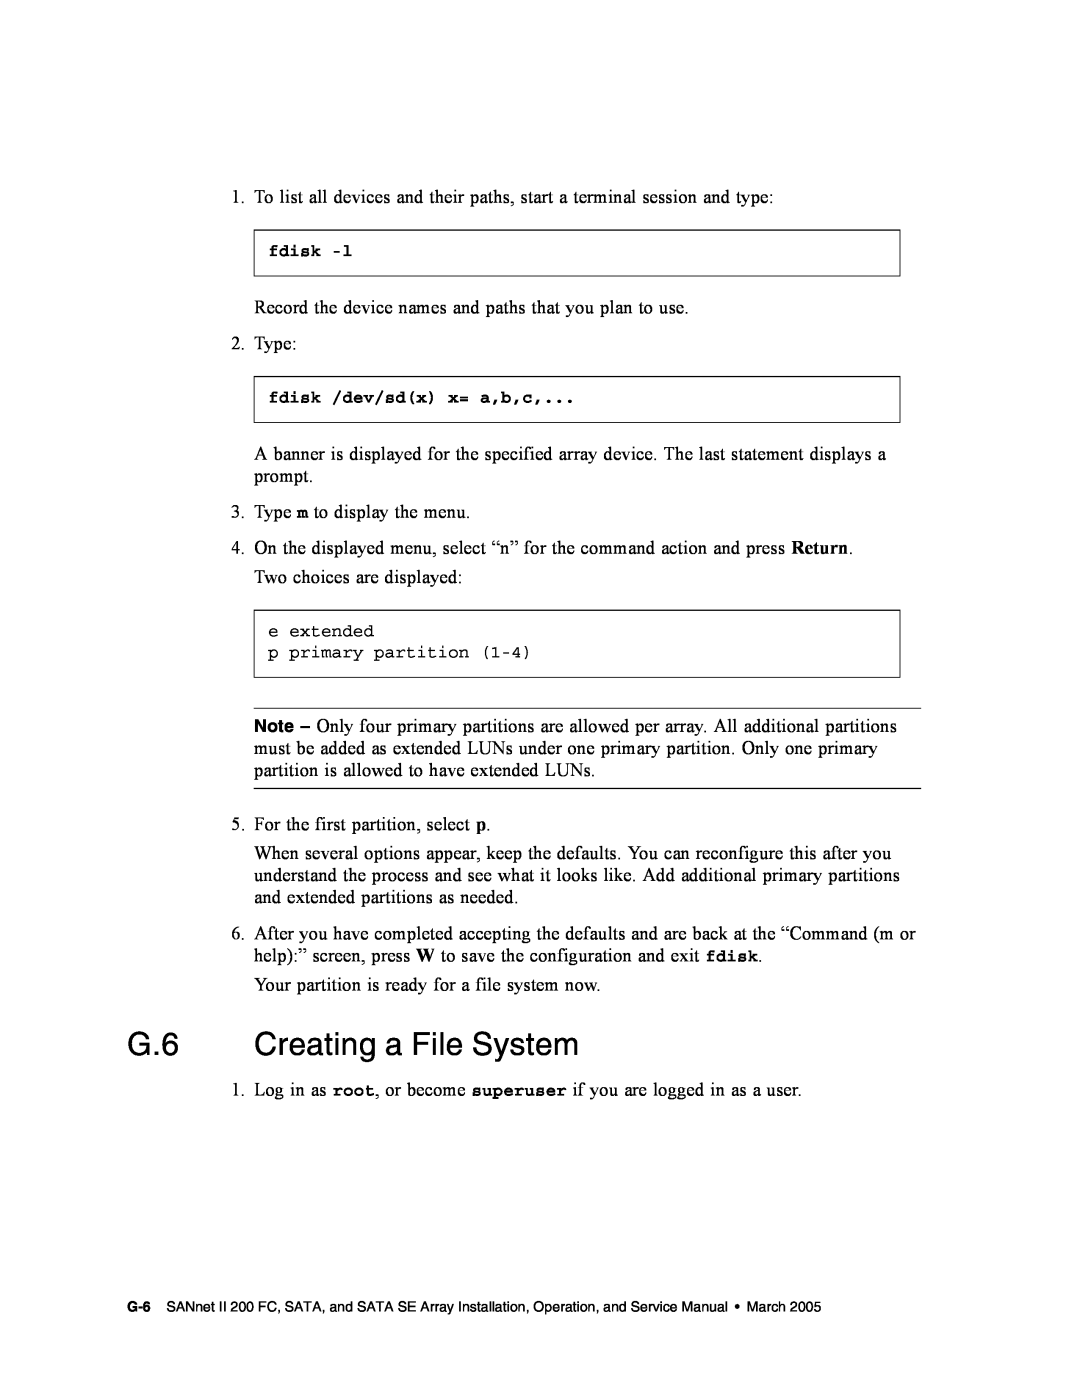 Dot Hill Systems II 200 FC service manual G.6 Creating a File System 